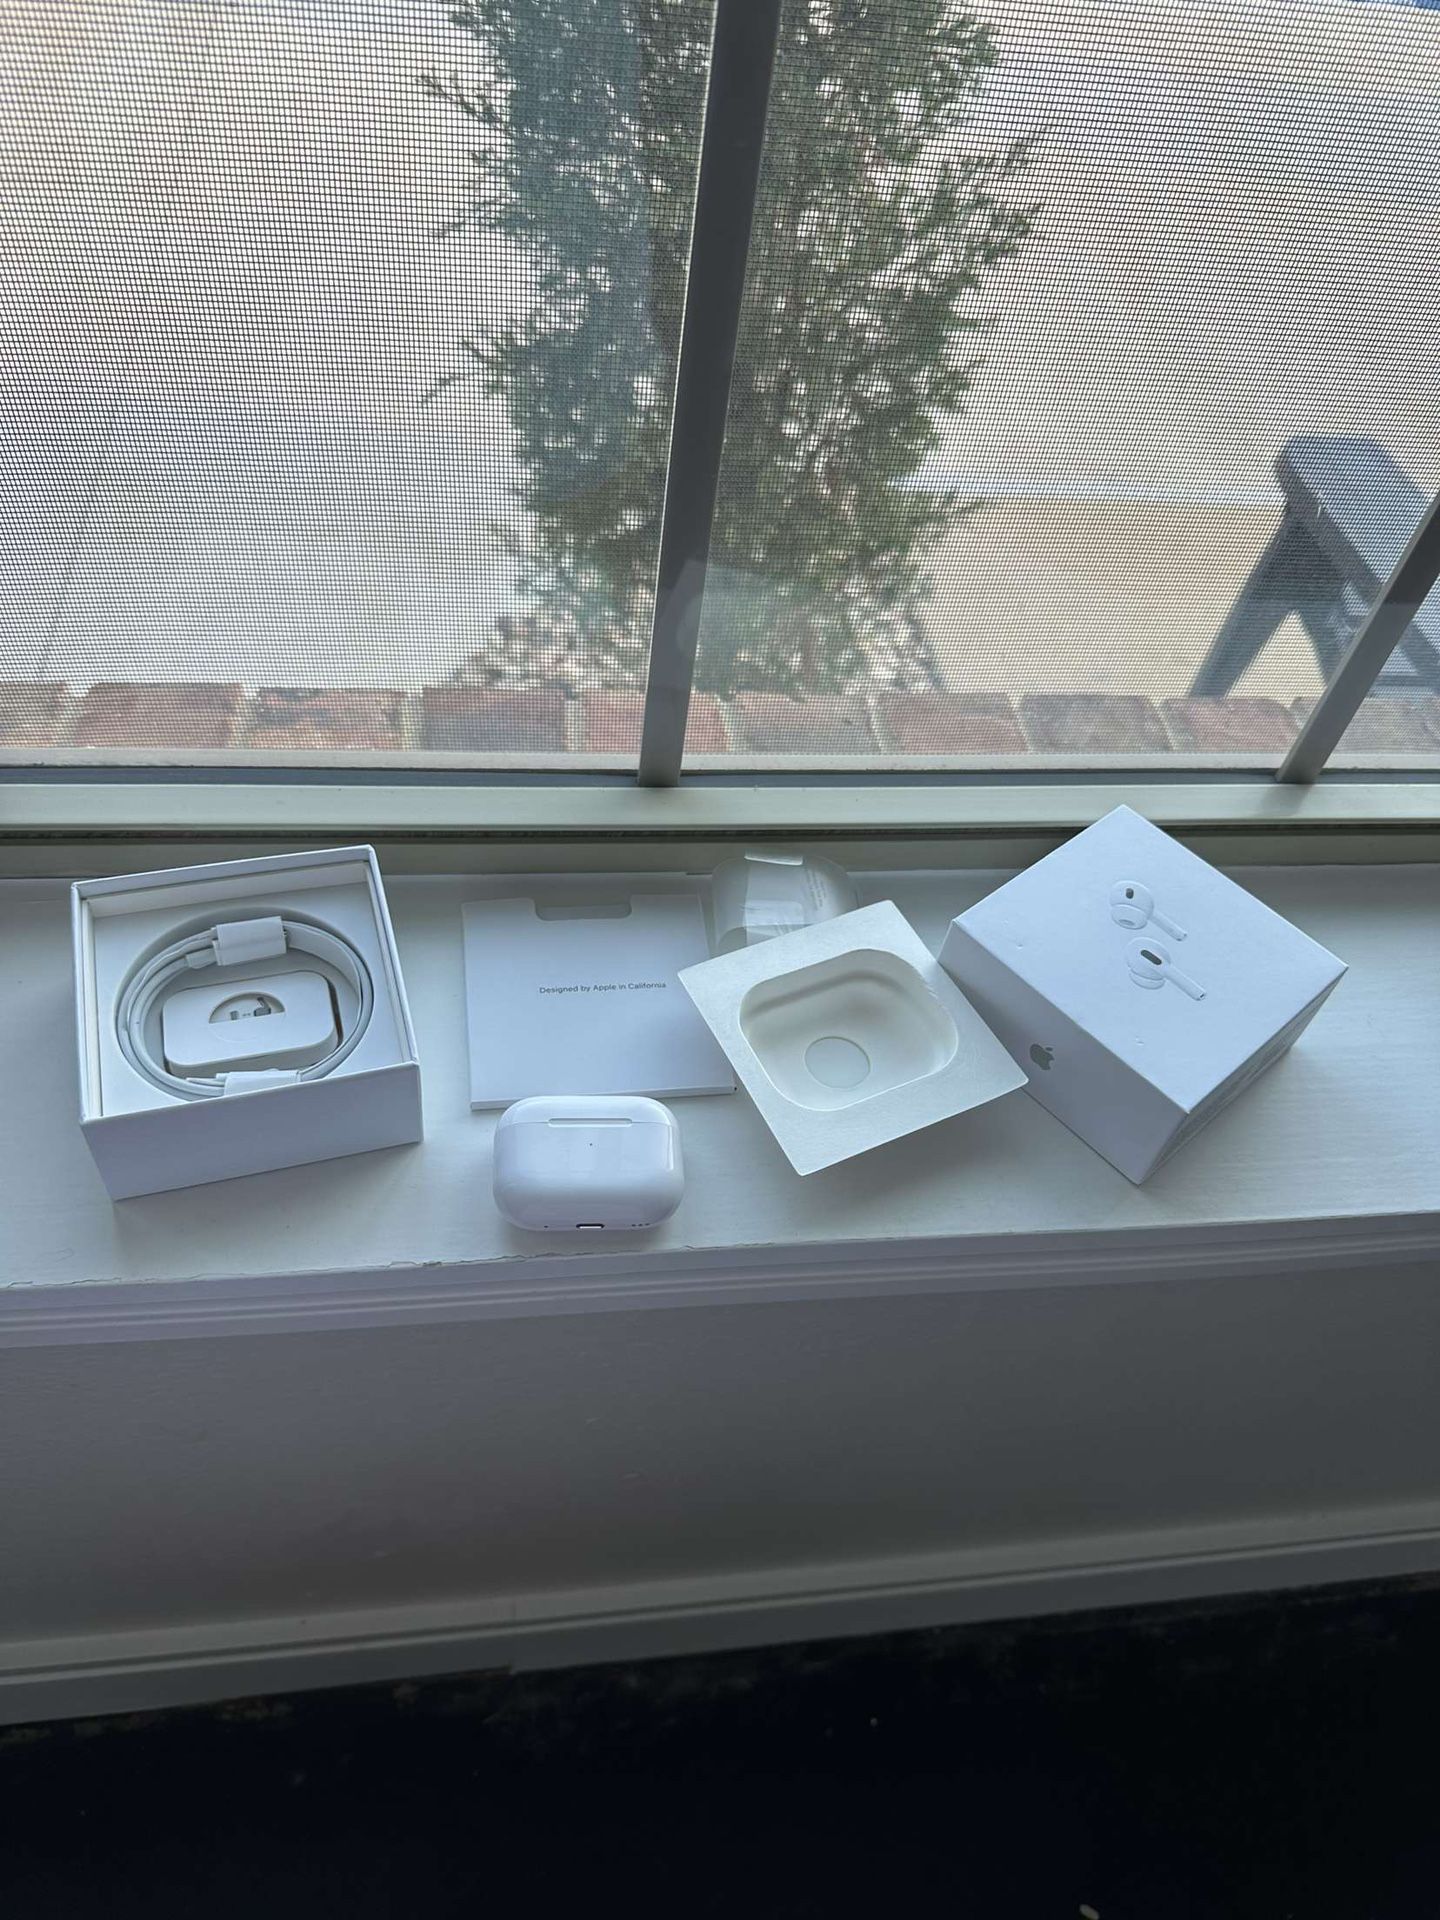 Airpods pro’s Generation 2 slightly used